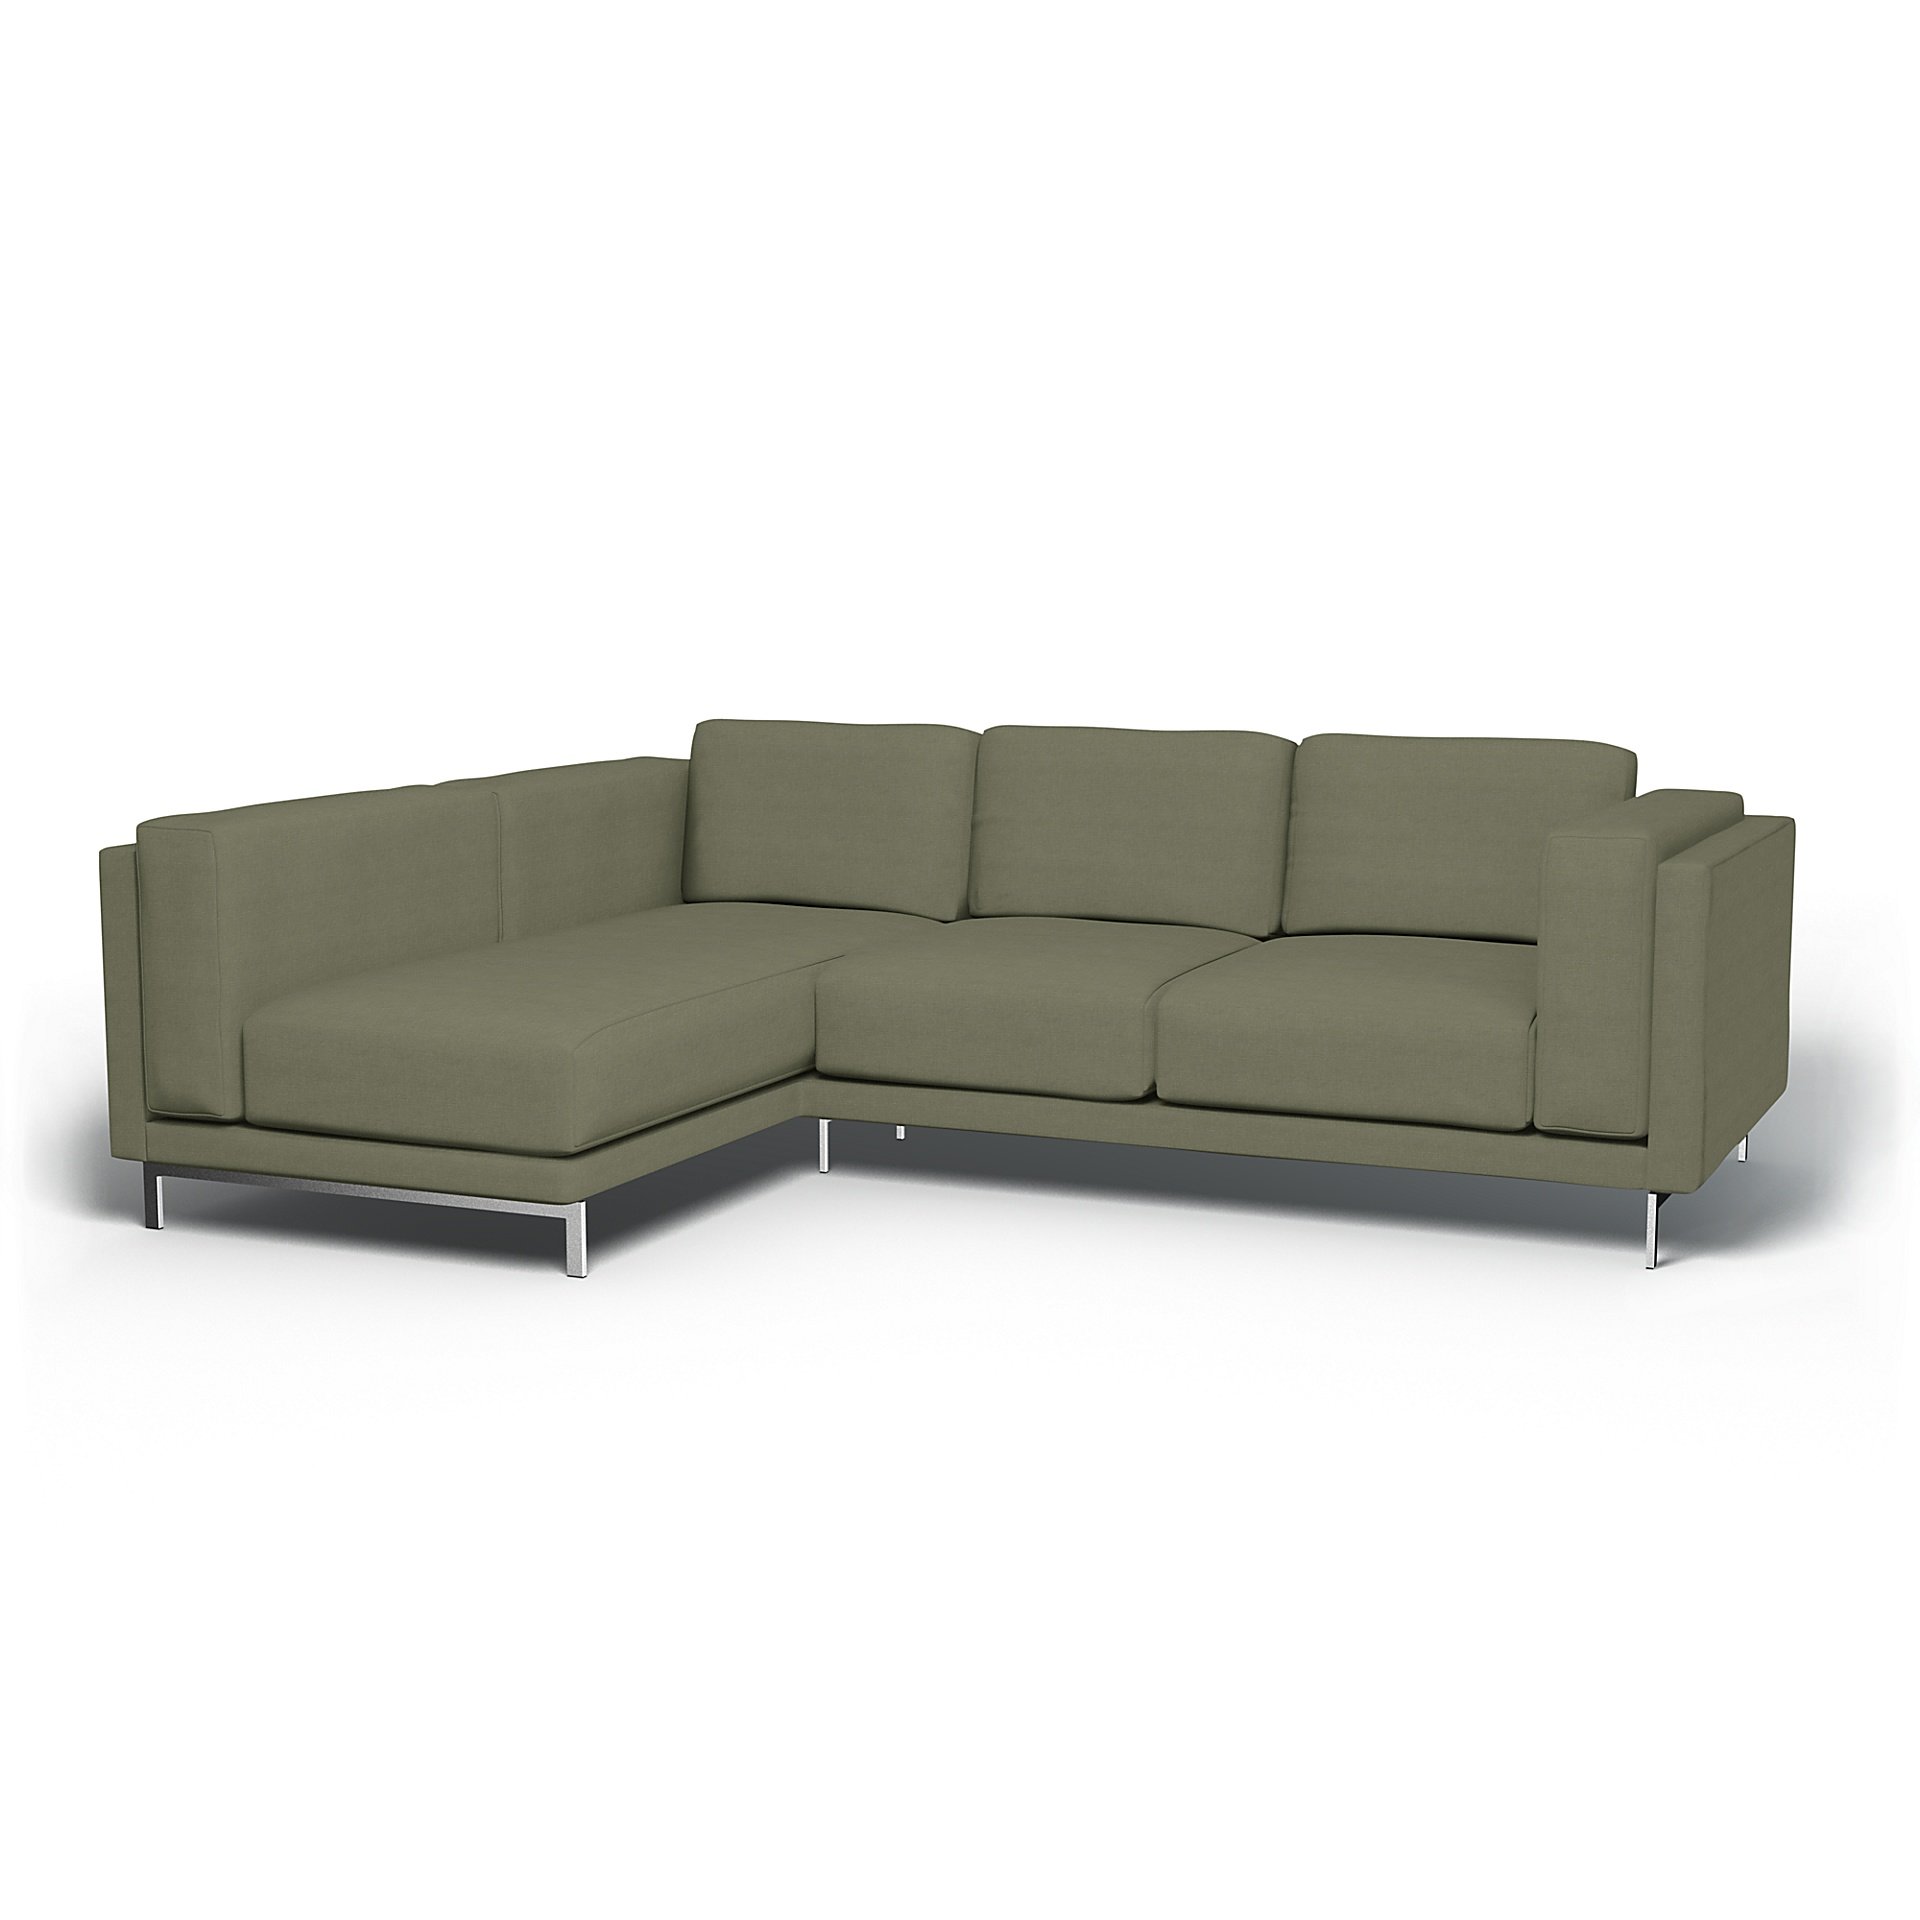 IKEA - Nockeby 3 Seater Sofa with Left Chaise Cover, Sage, Linen - Bemz